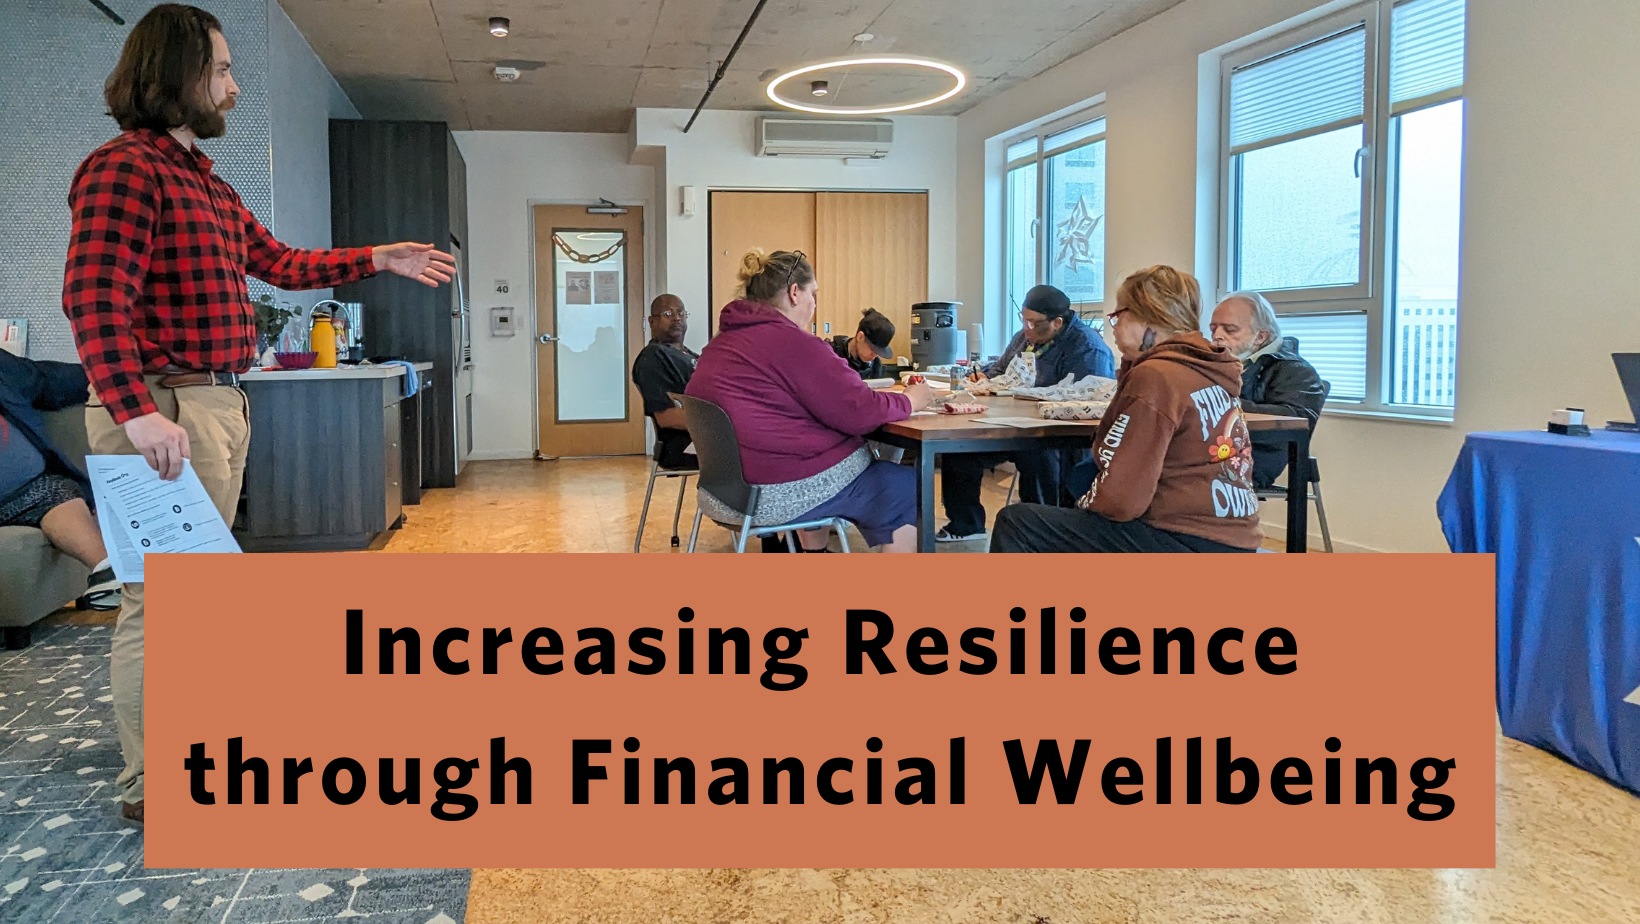 a picture of 6 people sitting around a table listening to a man standing up presenting with the words “Increasing Resilience through Financial Wellbeing”.